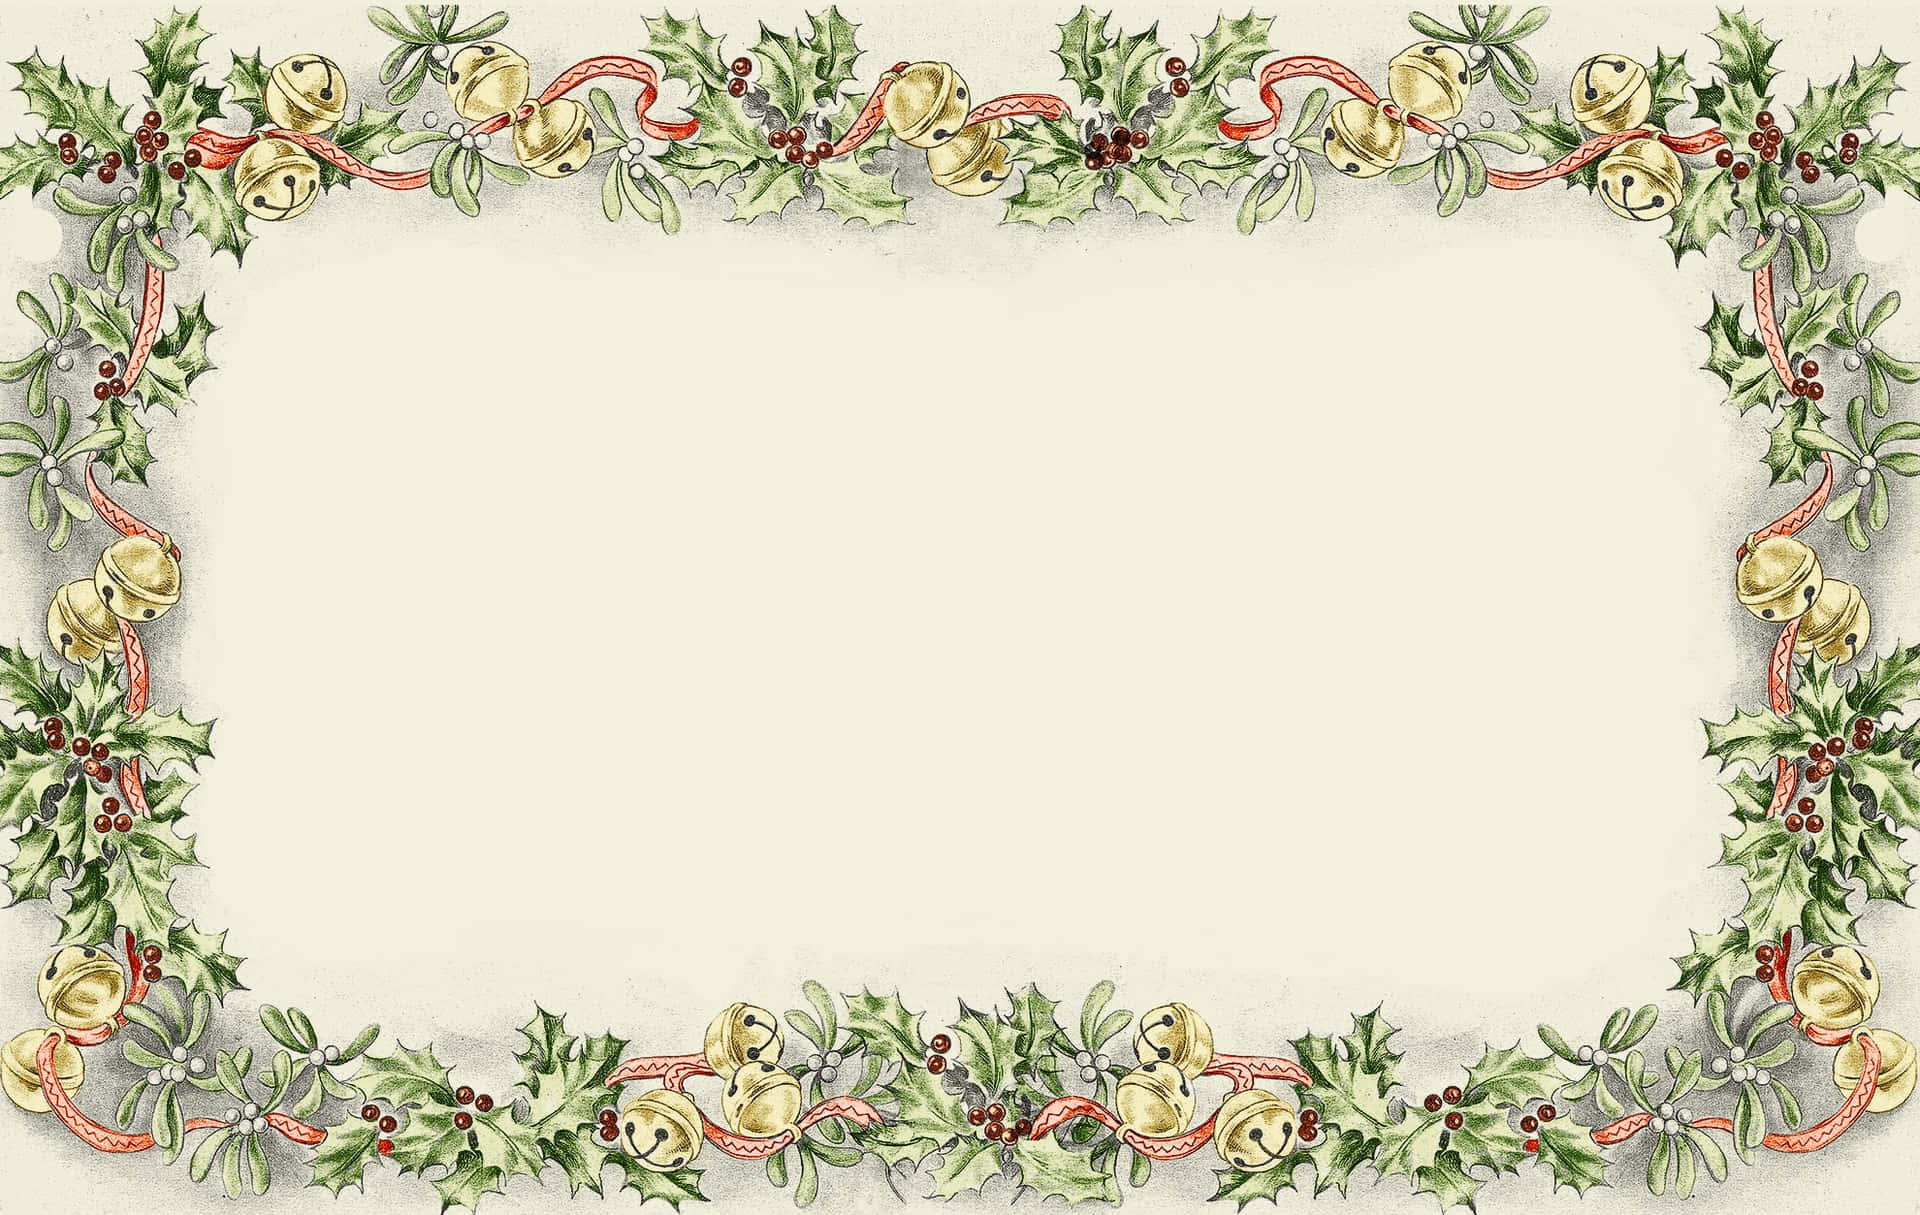 A Christmas Frame With Holly And Berries